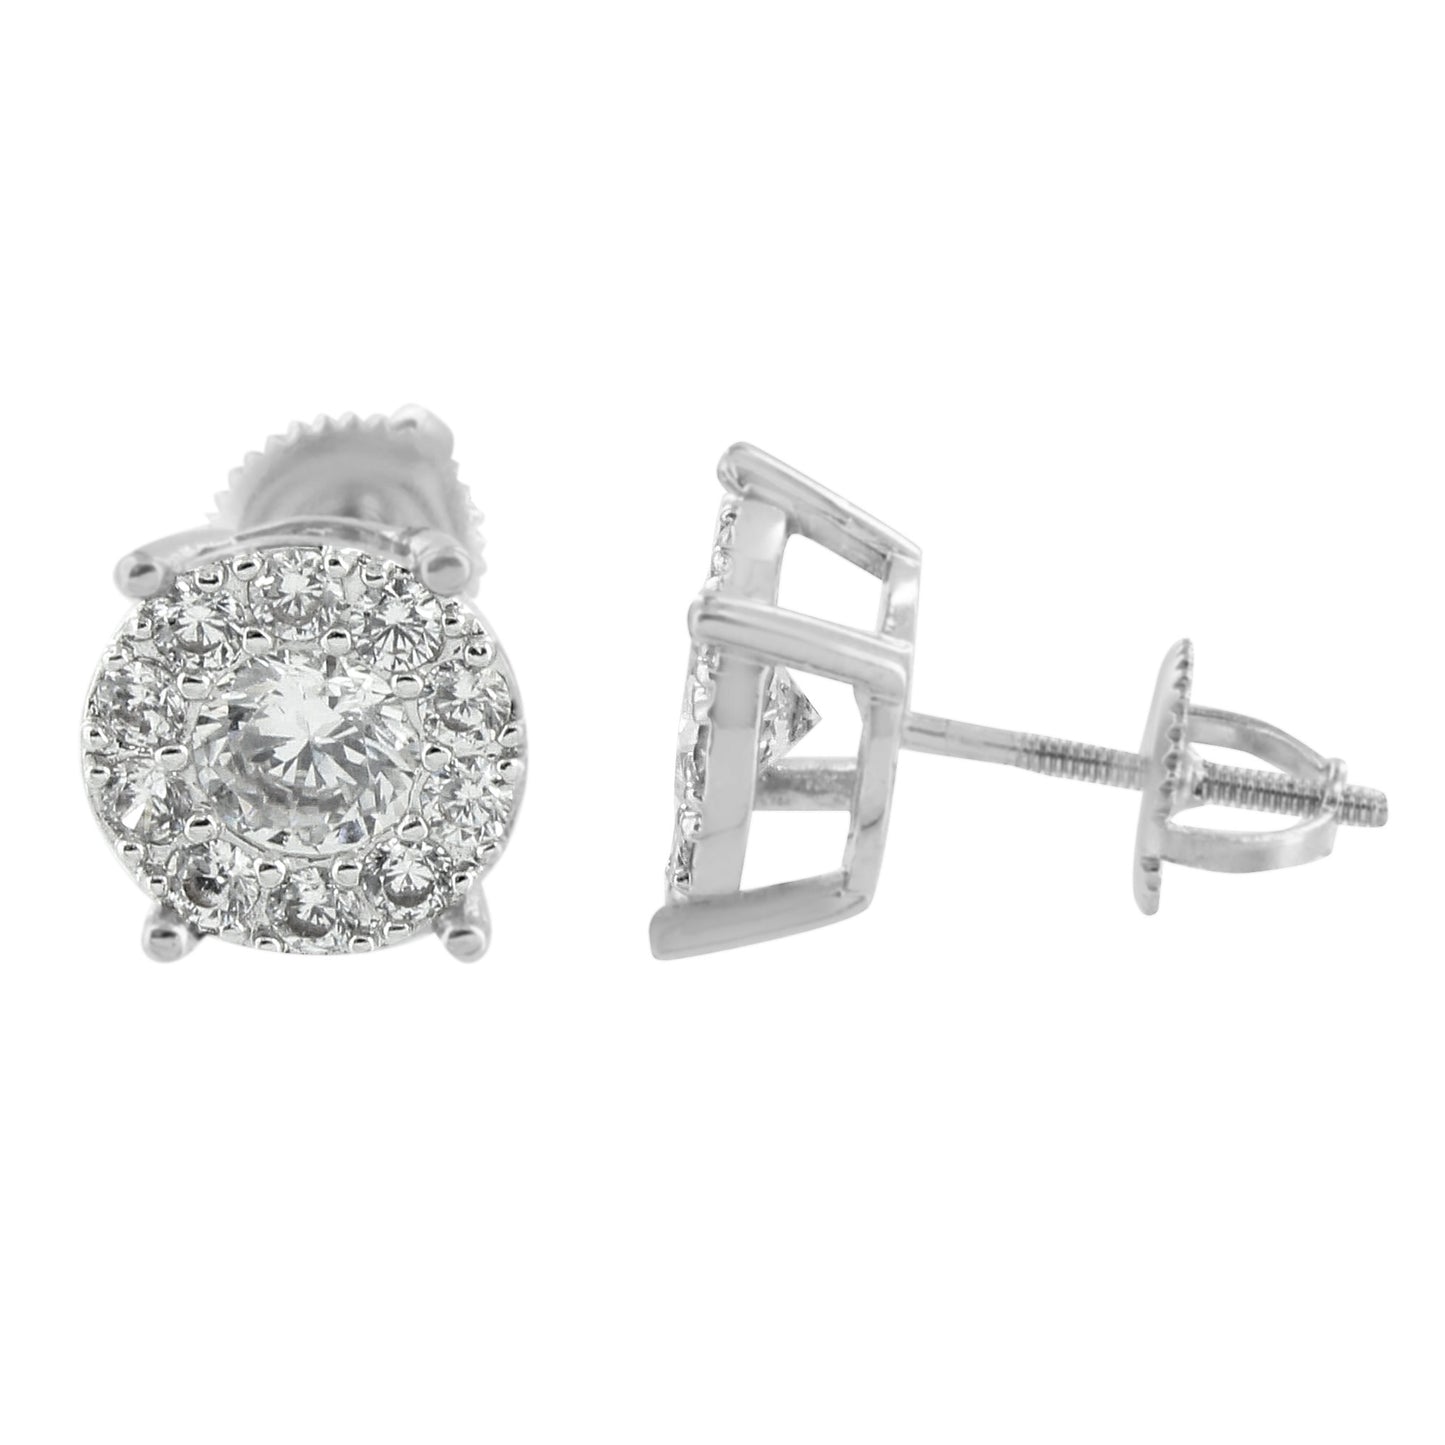 Mens White Finish Earrings Solitaire Simulated Diamonds Screw Back